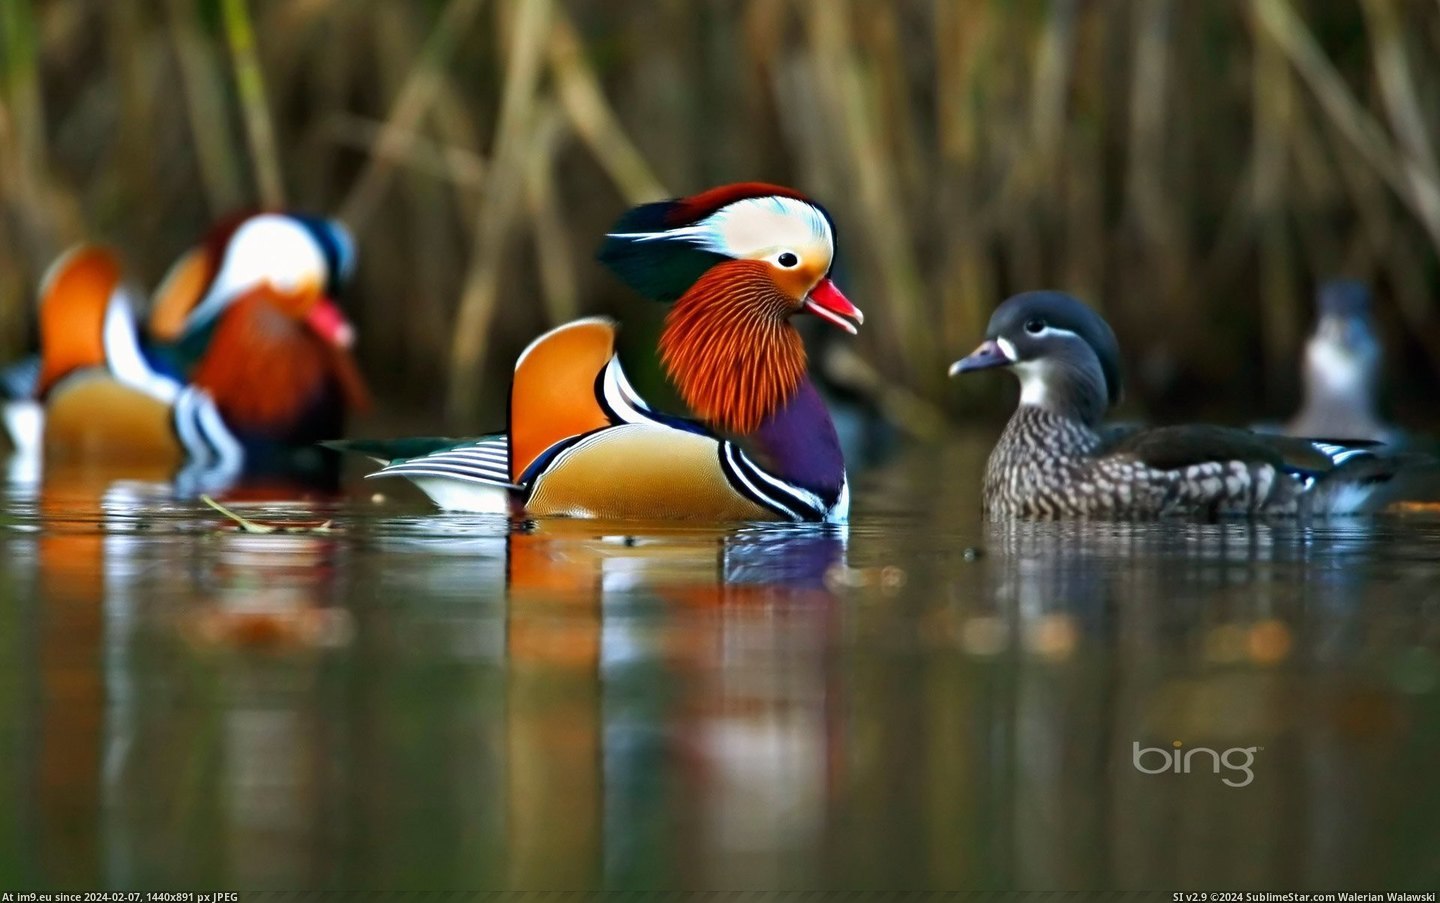 Mandarin ducks swimming in the Forest of Dean, Gloucestershire County, England (Getty Images) 2013-03-22 (in Best photos of March 2013)